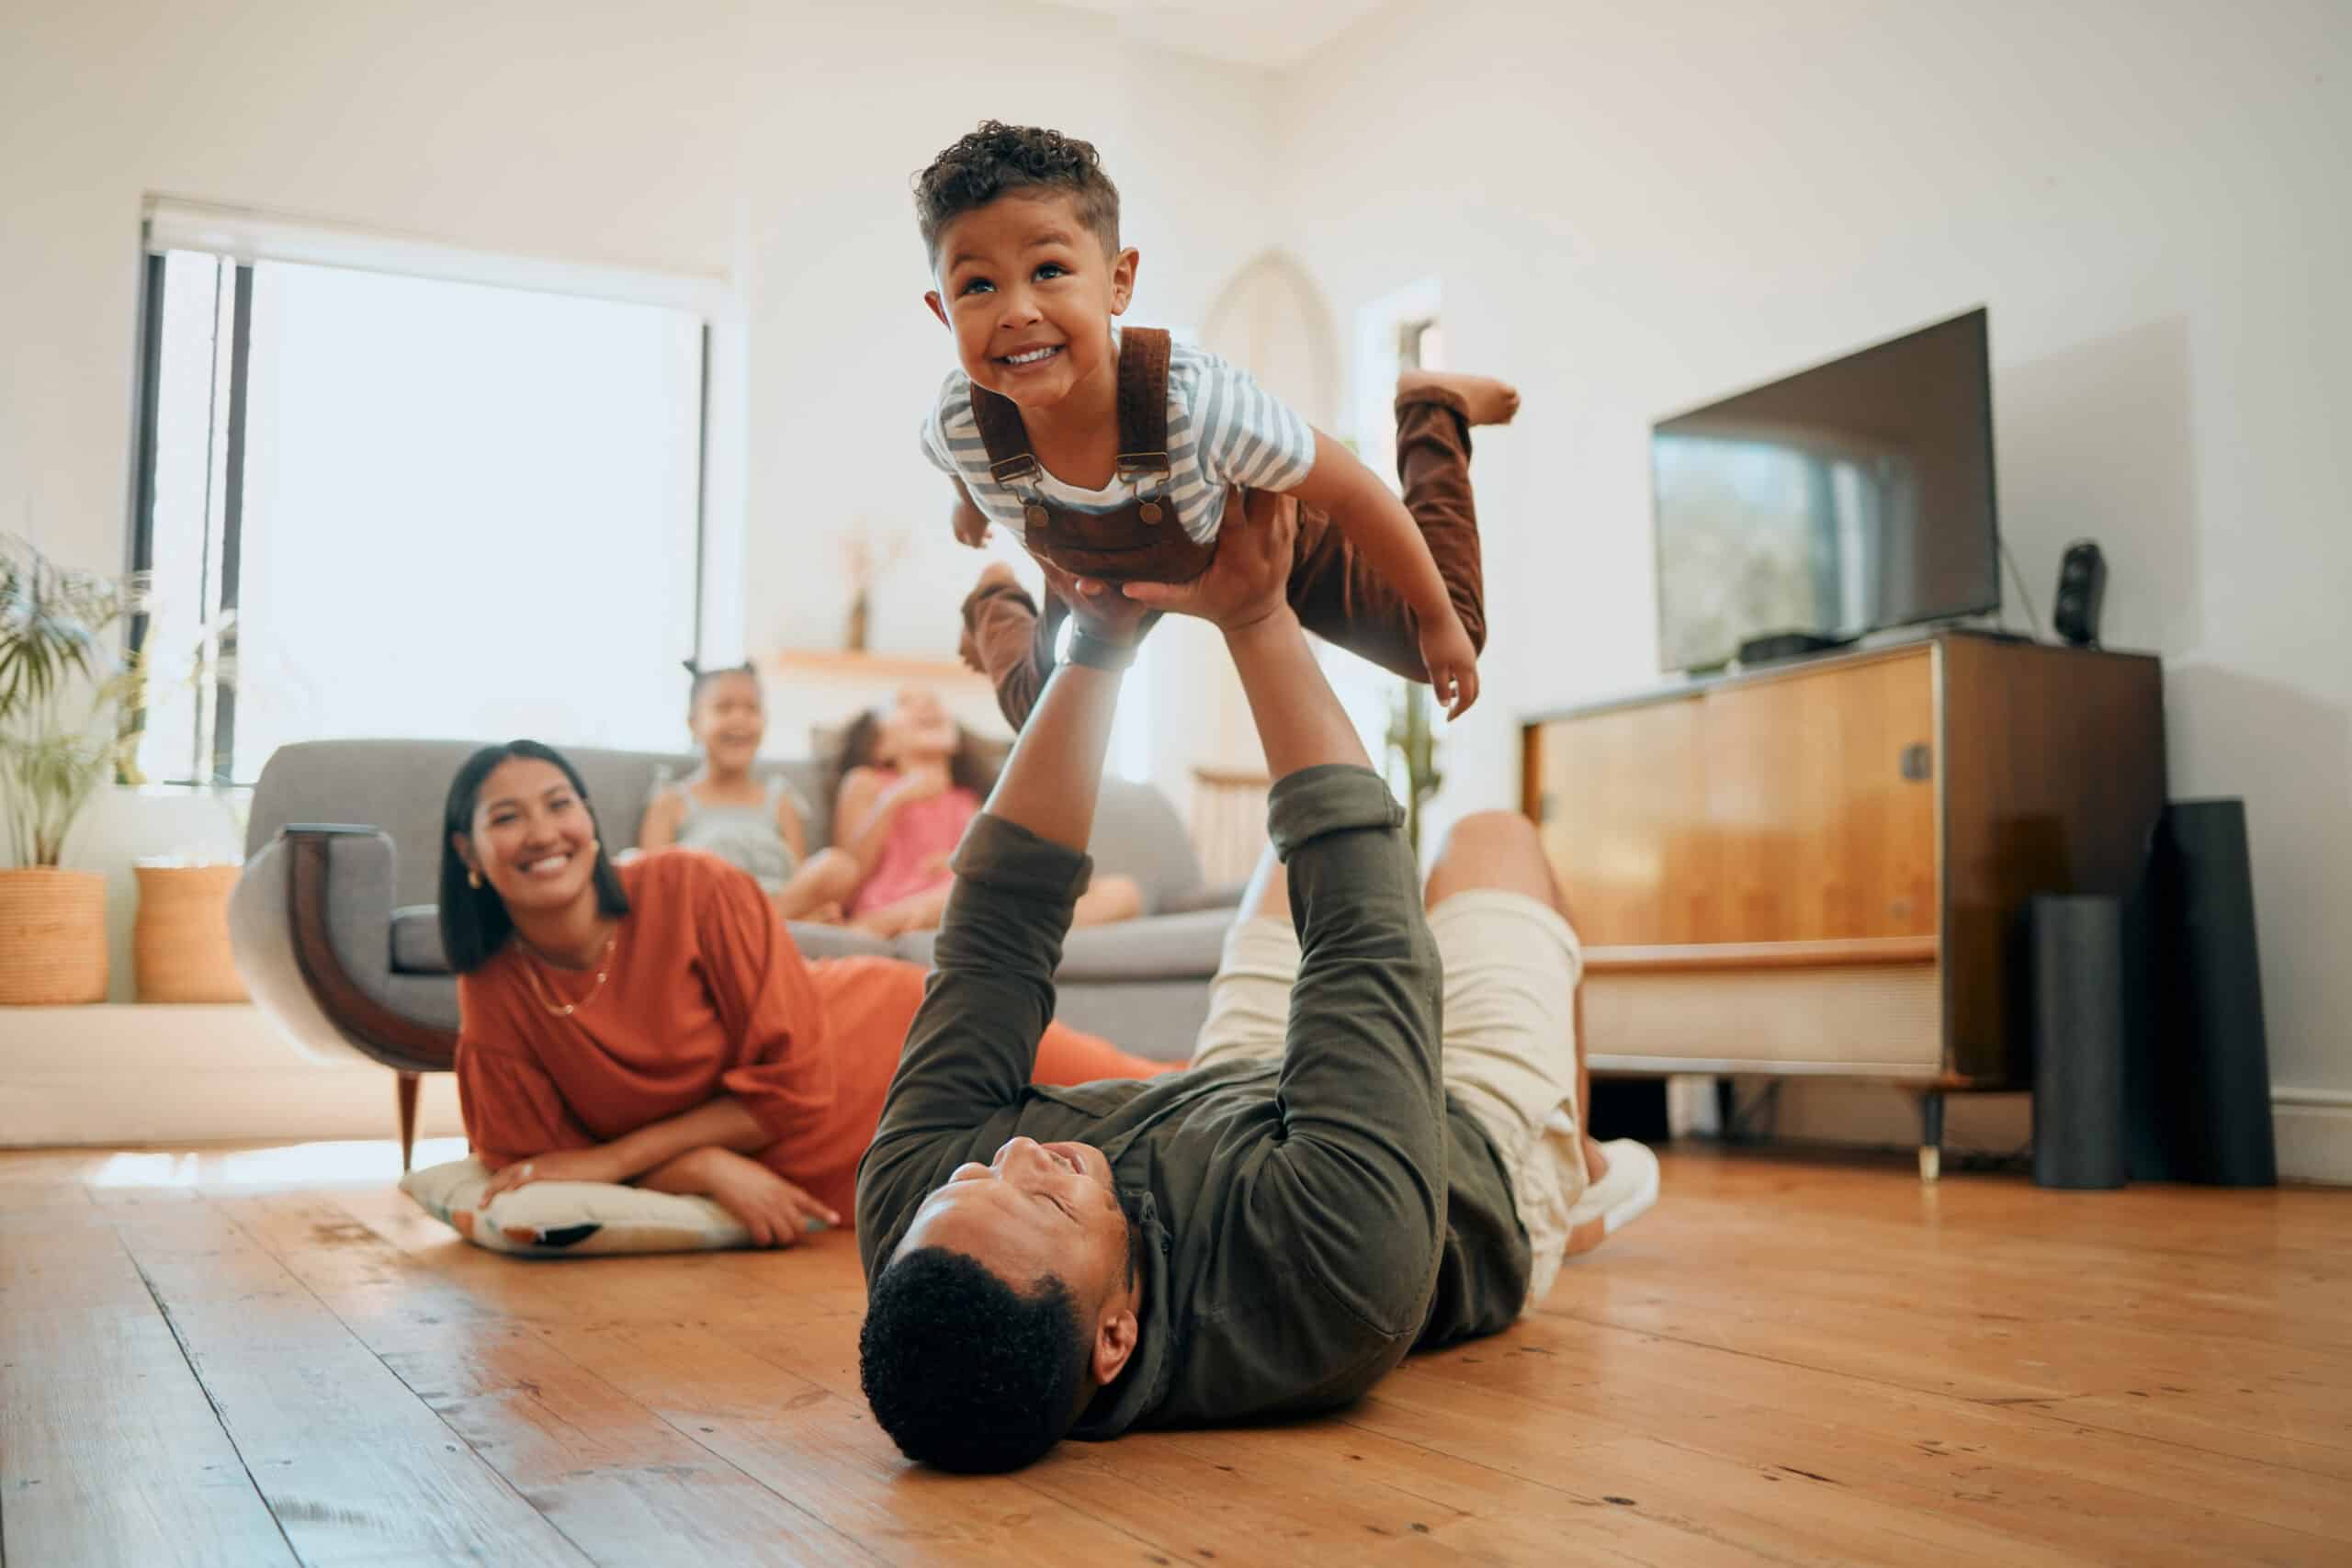 kid costs: A happy mixed race family of five relaxing in the lounge and being playful together. Loving black family bonding with their son while playing fun games on the floor at home